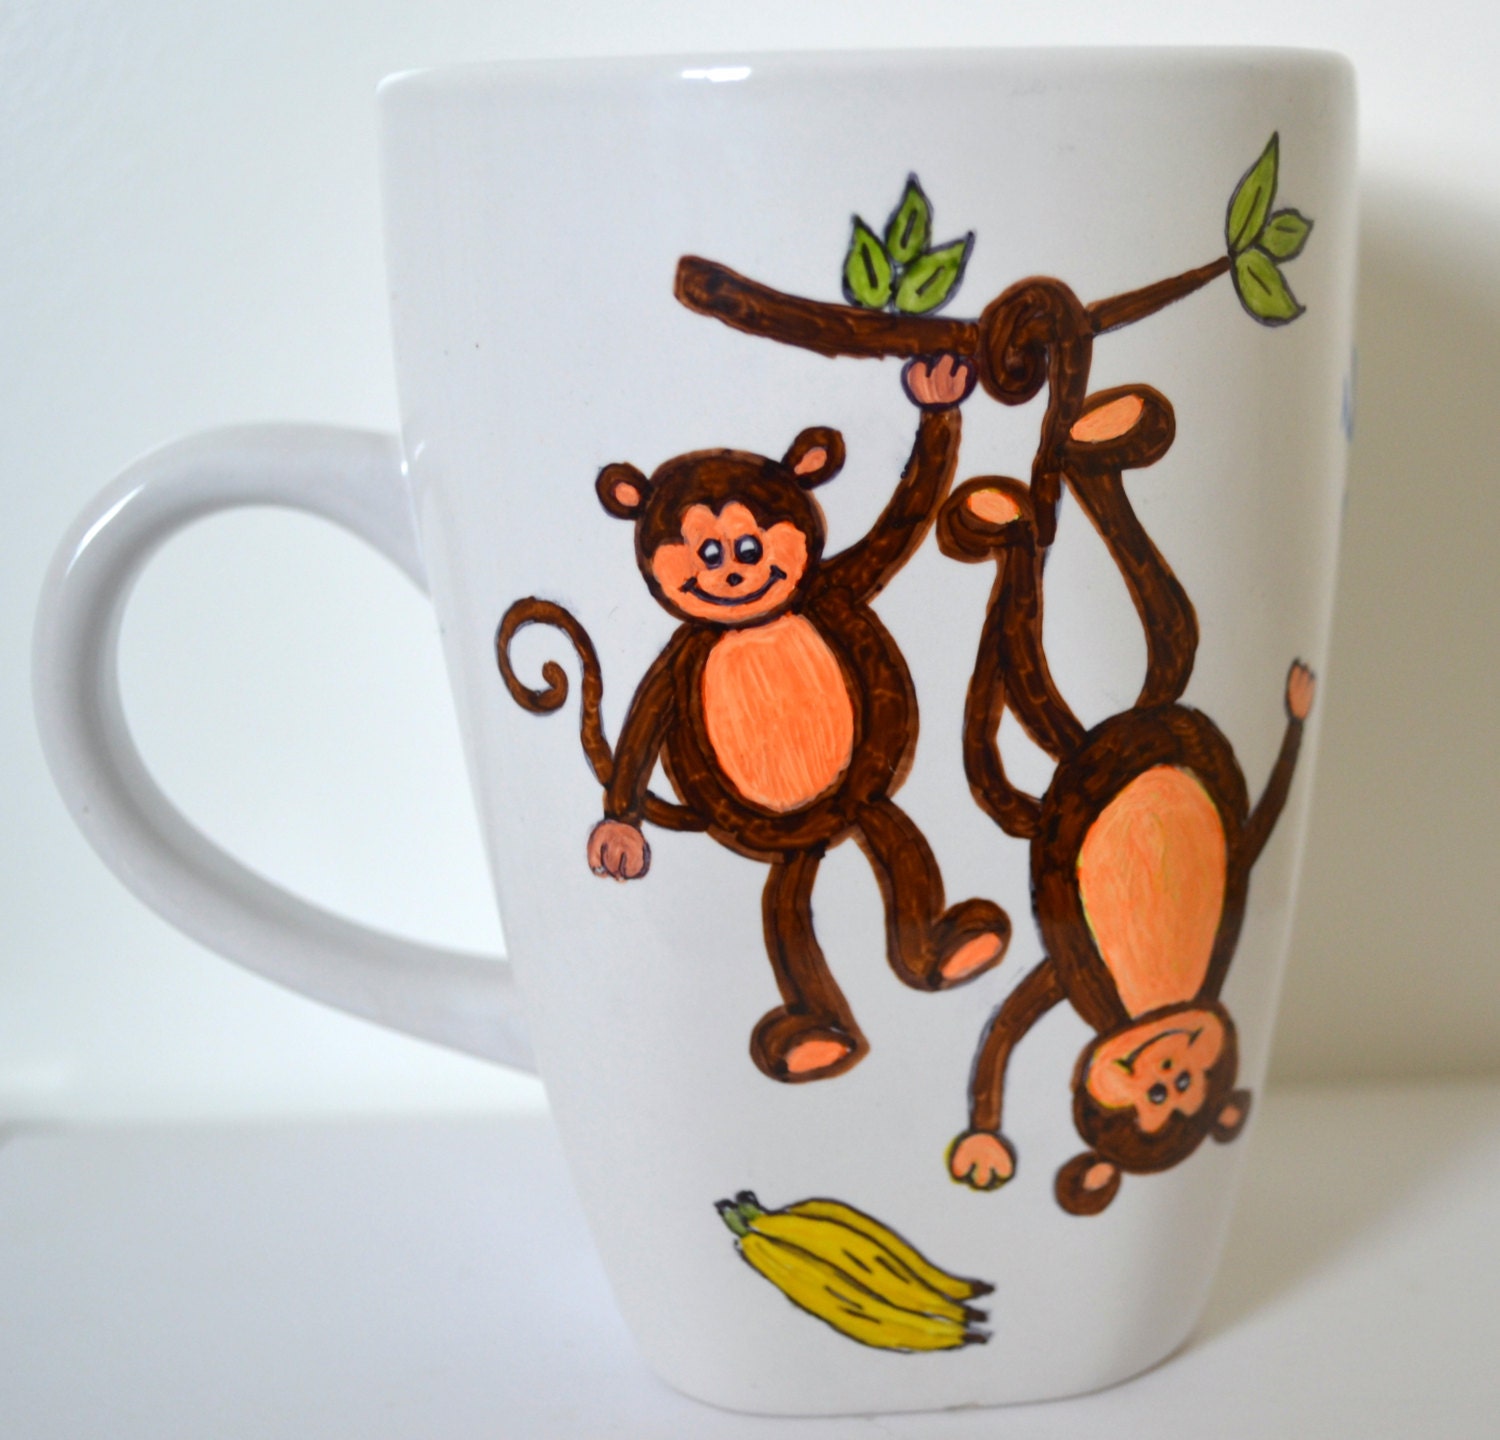 Monkey Coffee Mug Funny Personalized Gift, Customize For Any Occasion, Brown 10 oz - DreamAndCraft